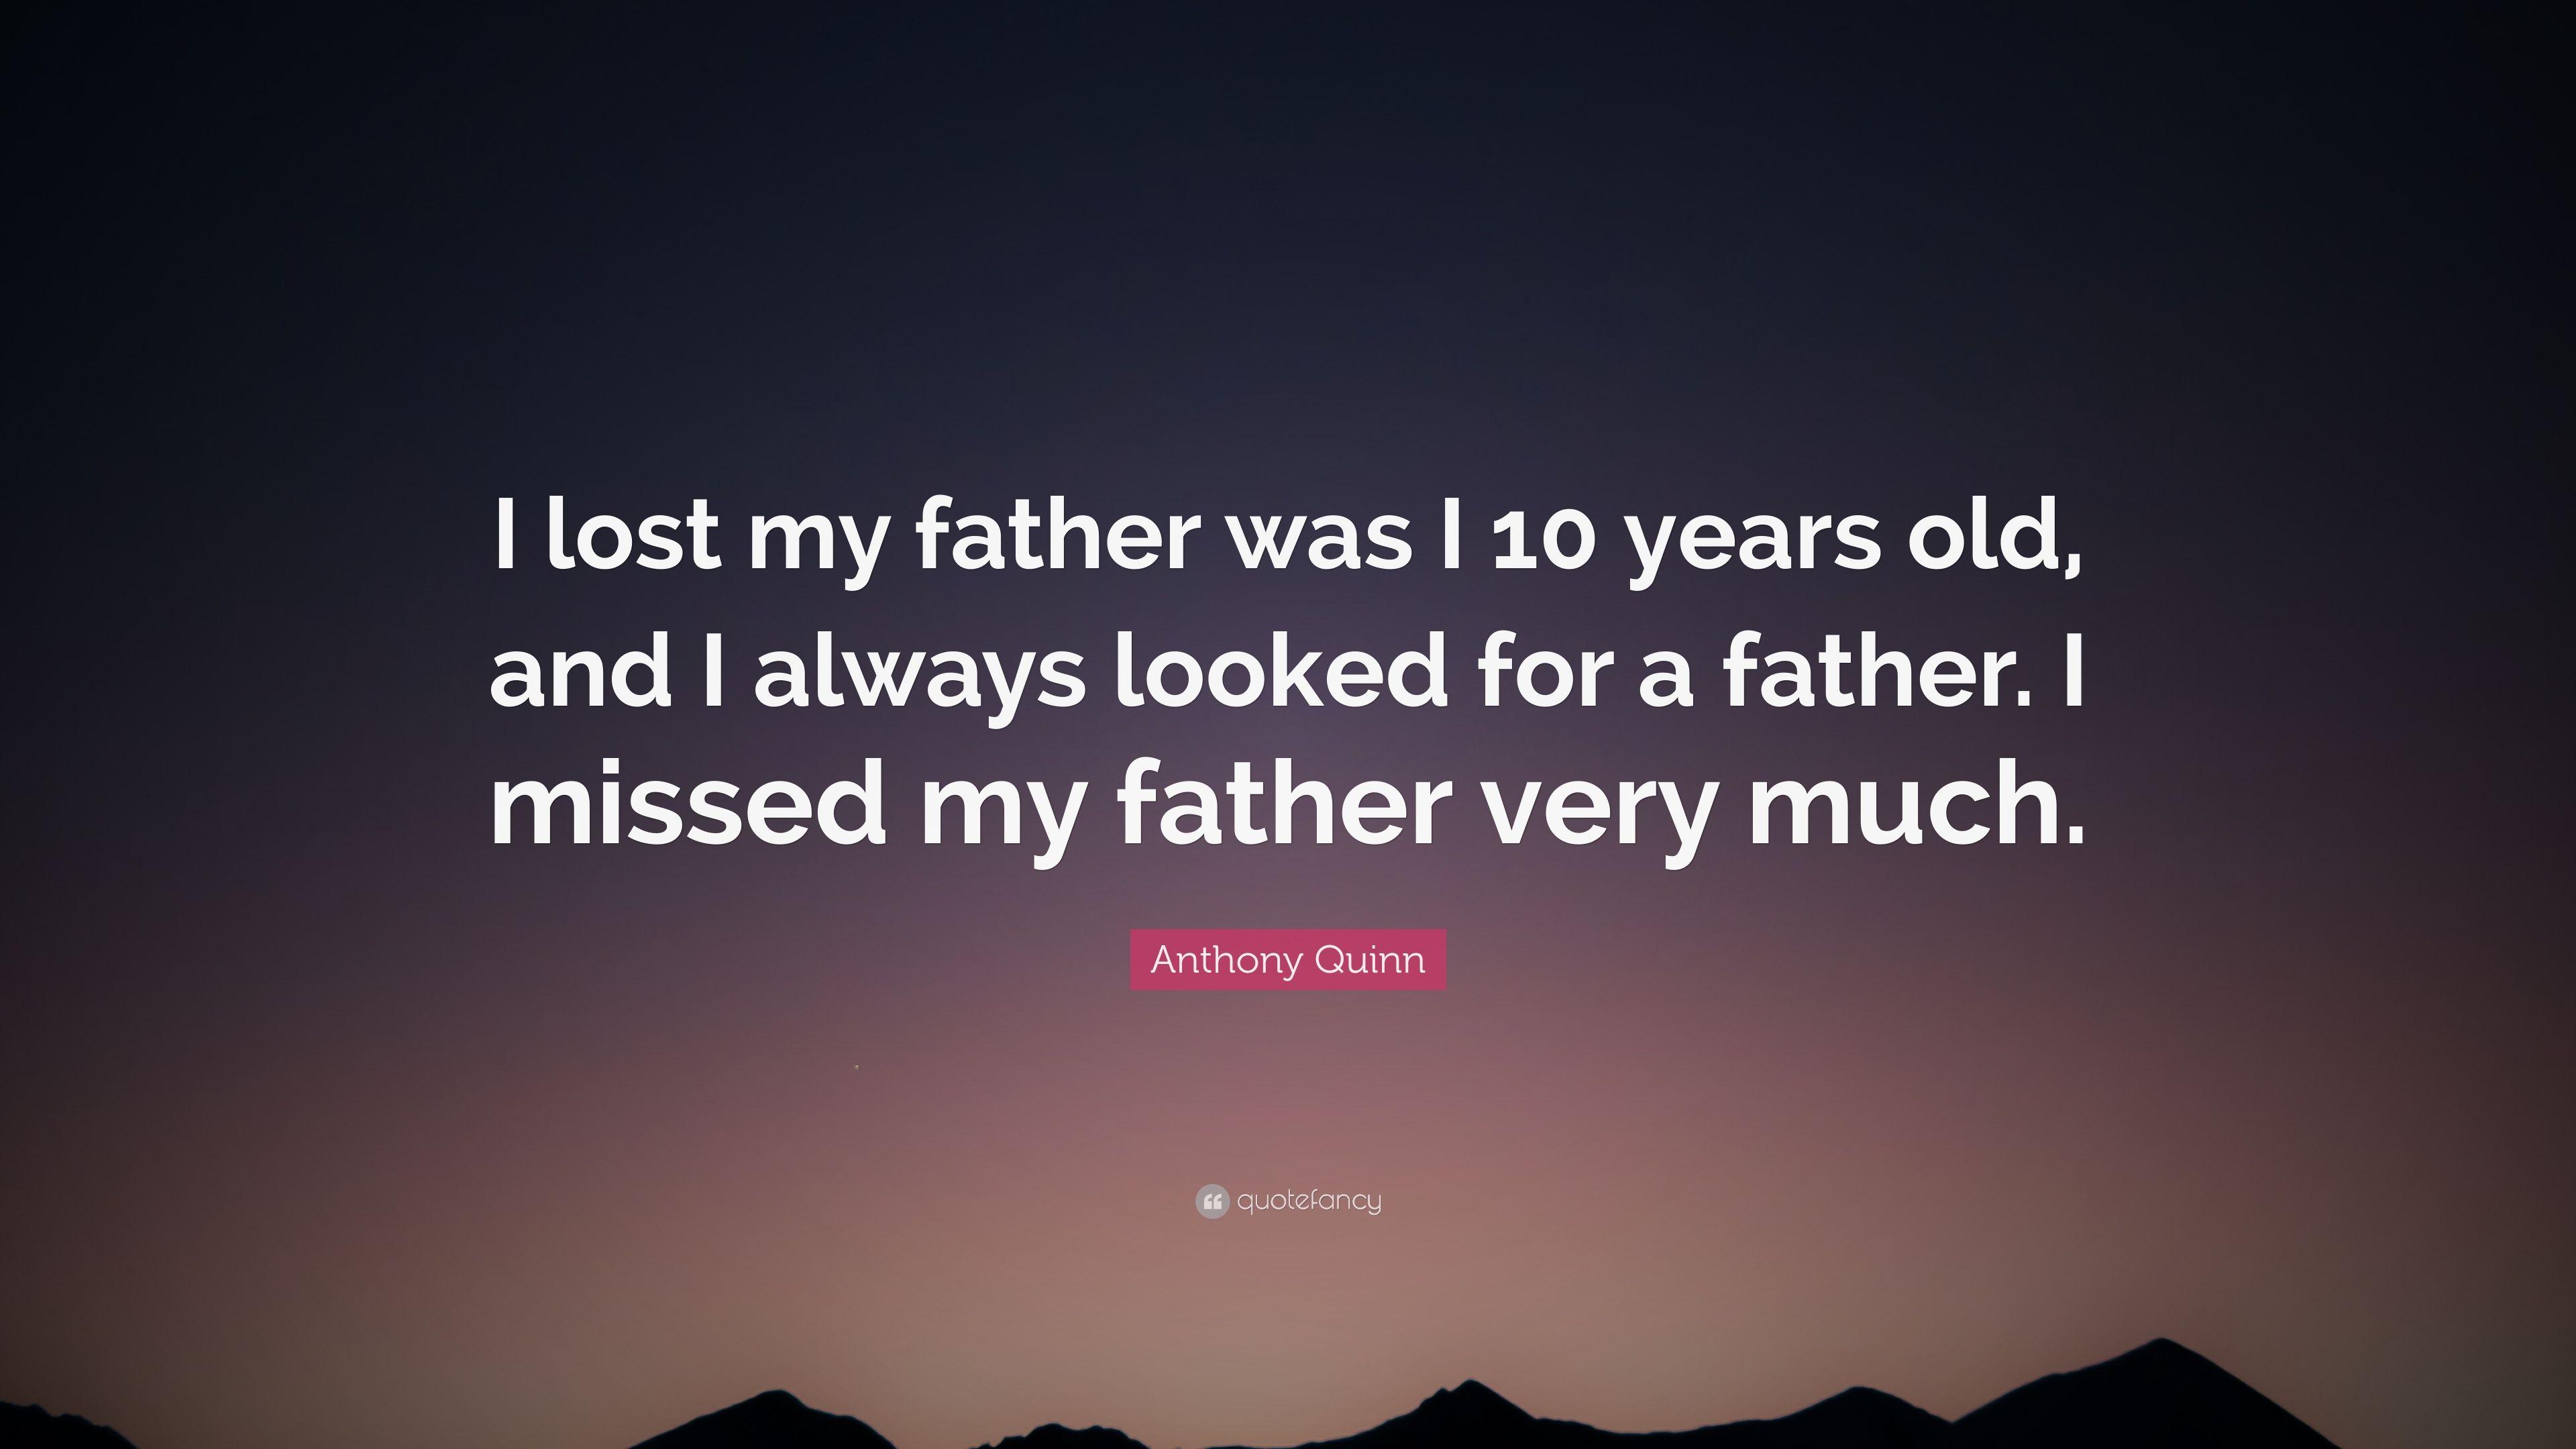 Anthony Quinn Quote: “I lost my father was I 10 years old